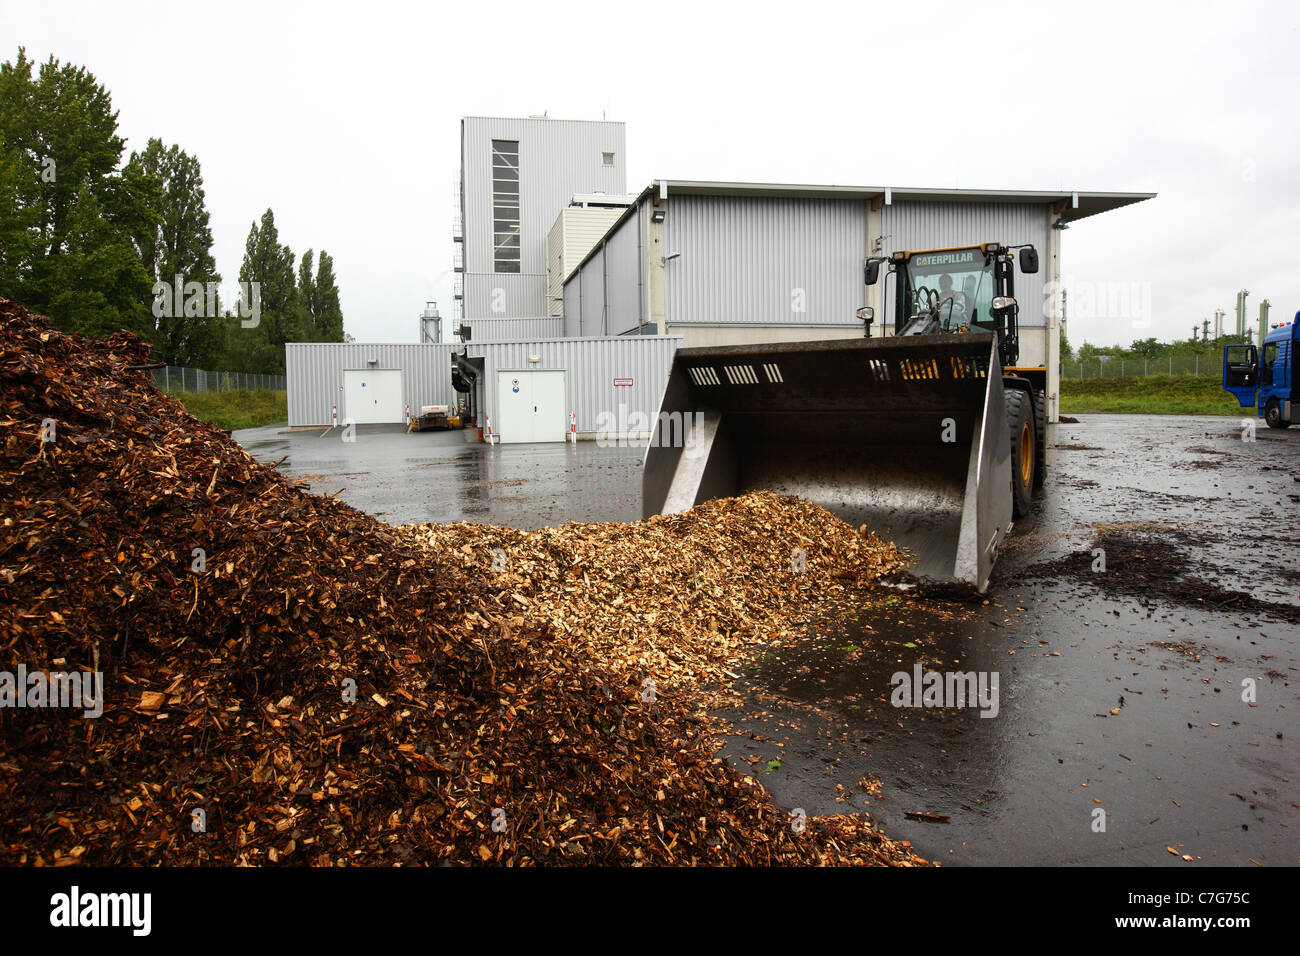 Biomass power plant. Burns waste wood to heat water, for running a steam turbine, to generate electric power. Stock Photo